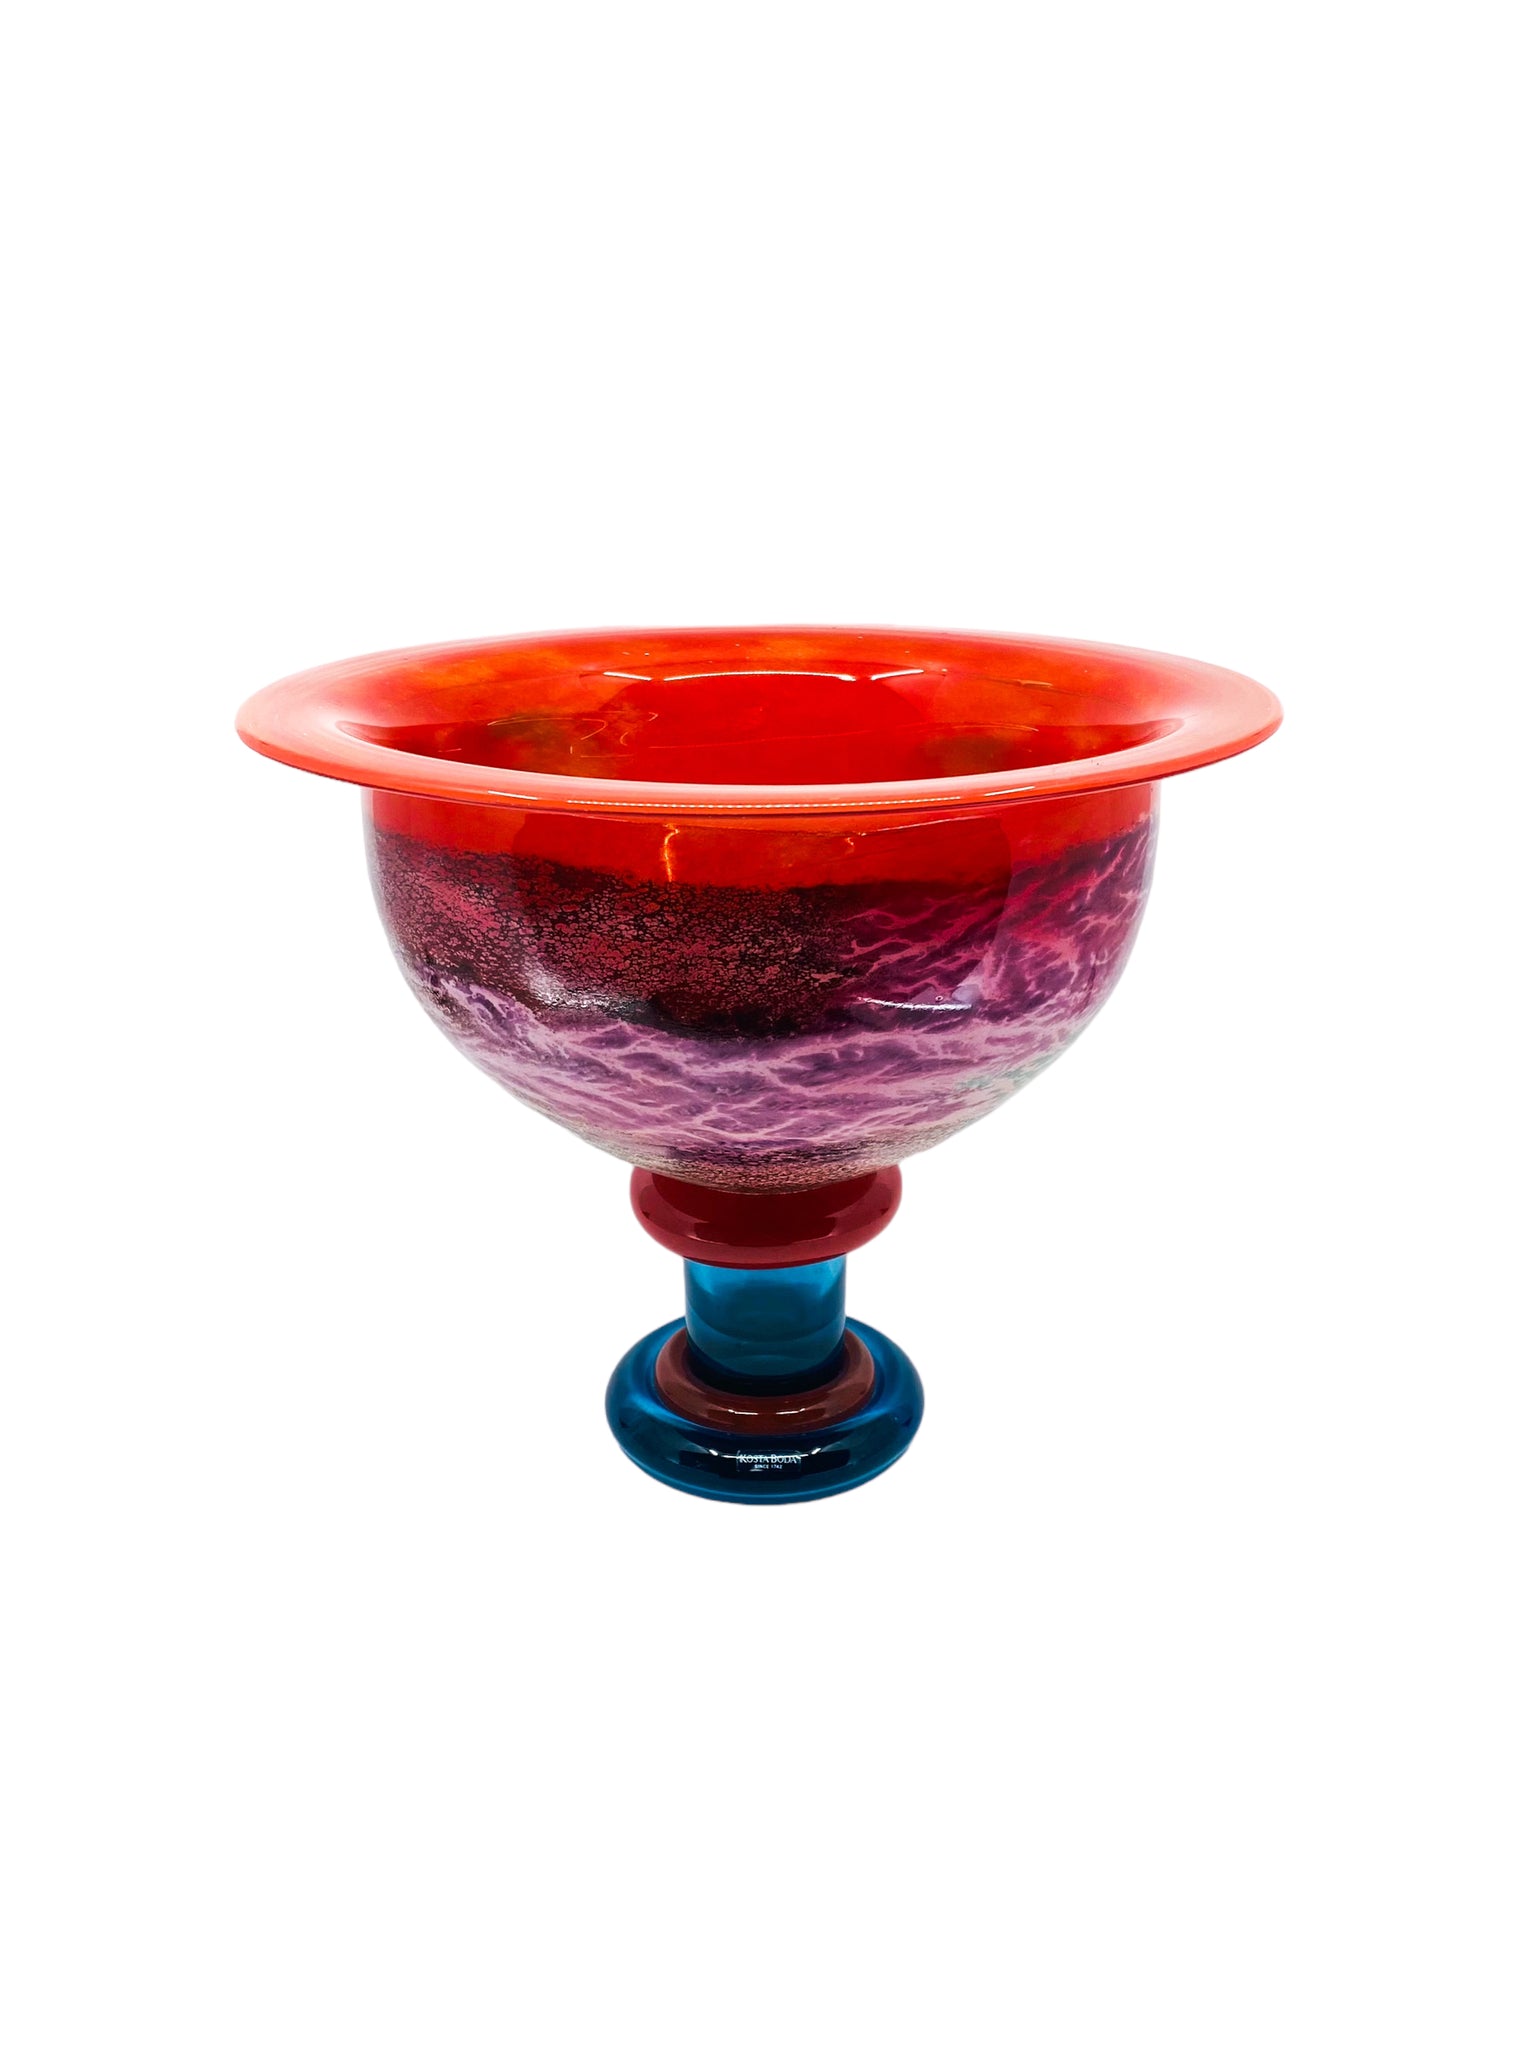 1991 Kosta Boda Large Art Glass Footed Bowl ‘CanCan’ Series by Kjell Engman